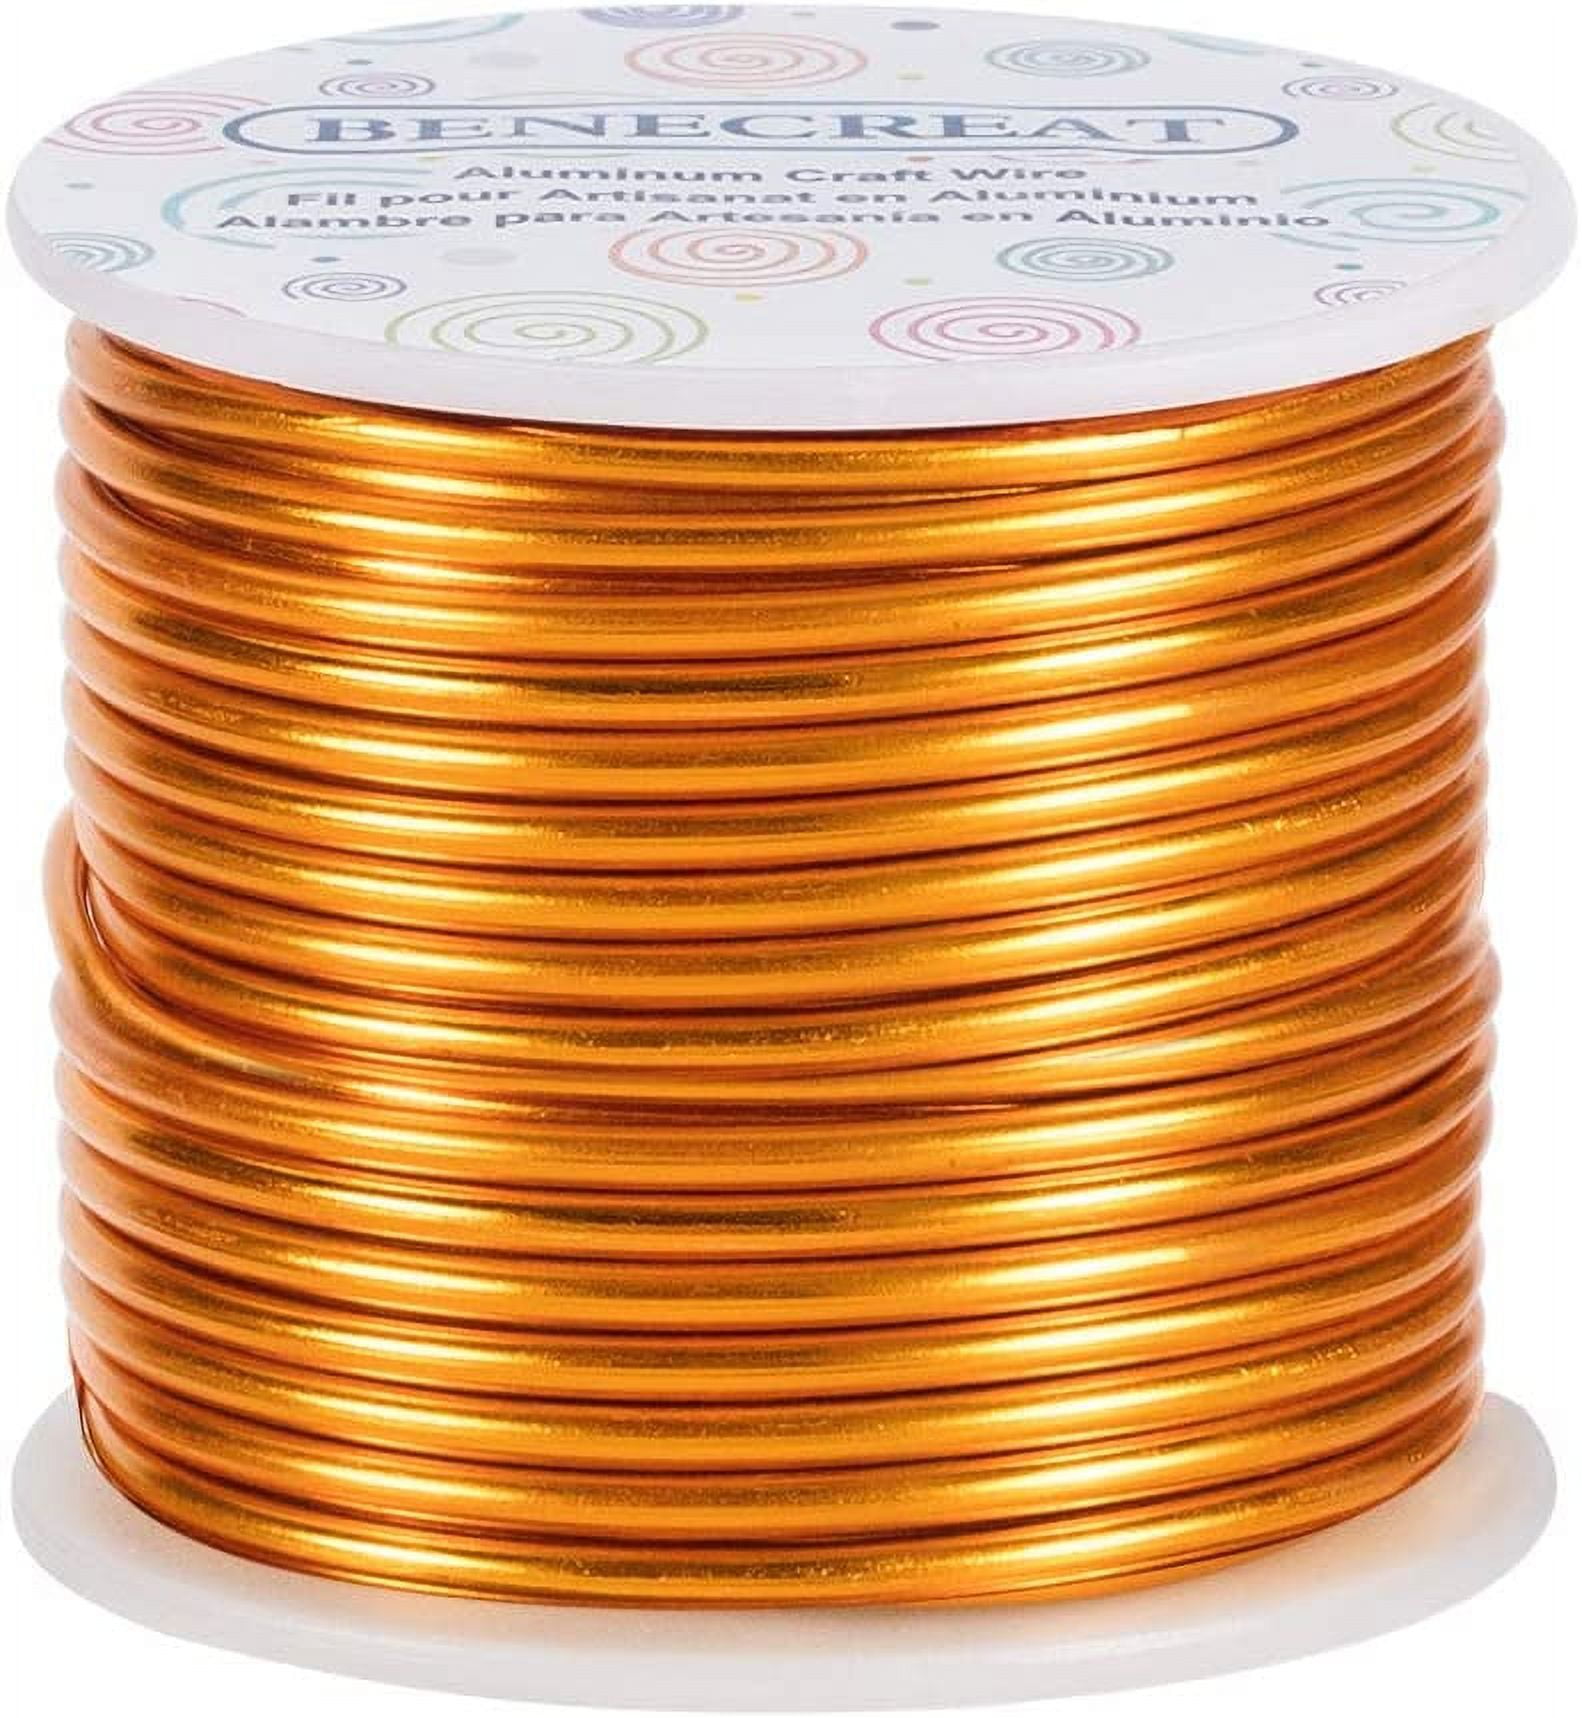 aluminum crafting wire, jewelry wire, 12 gauge, gold, wire, craft wire, 39  feet, jewelry making, vintage supplies, jewelry supplies, gold wire, us